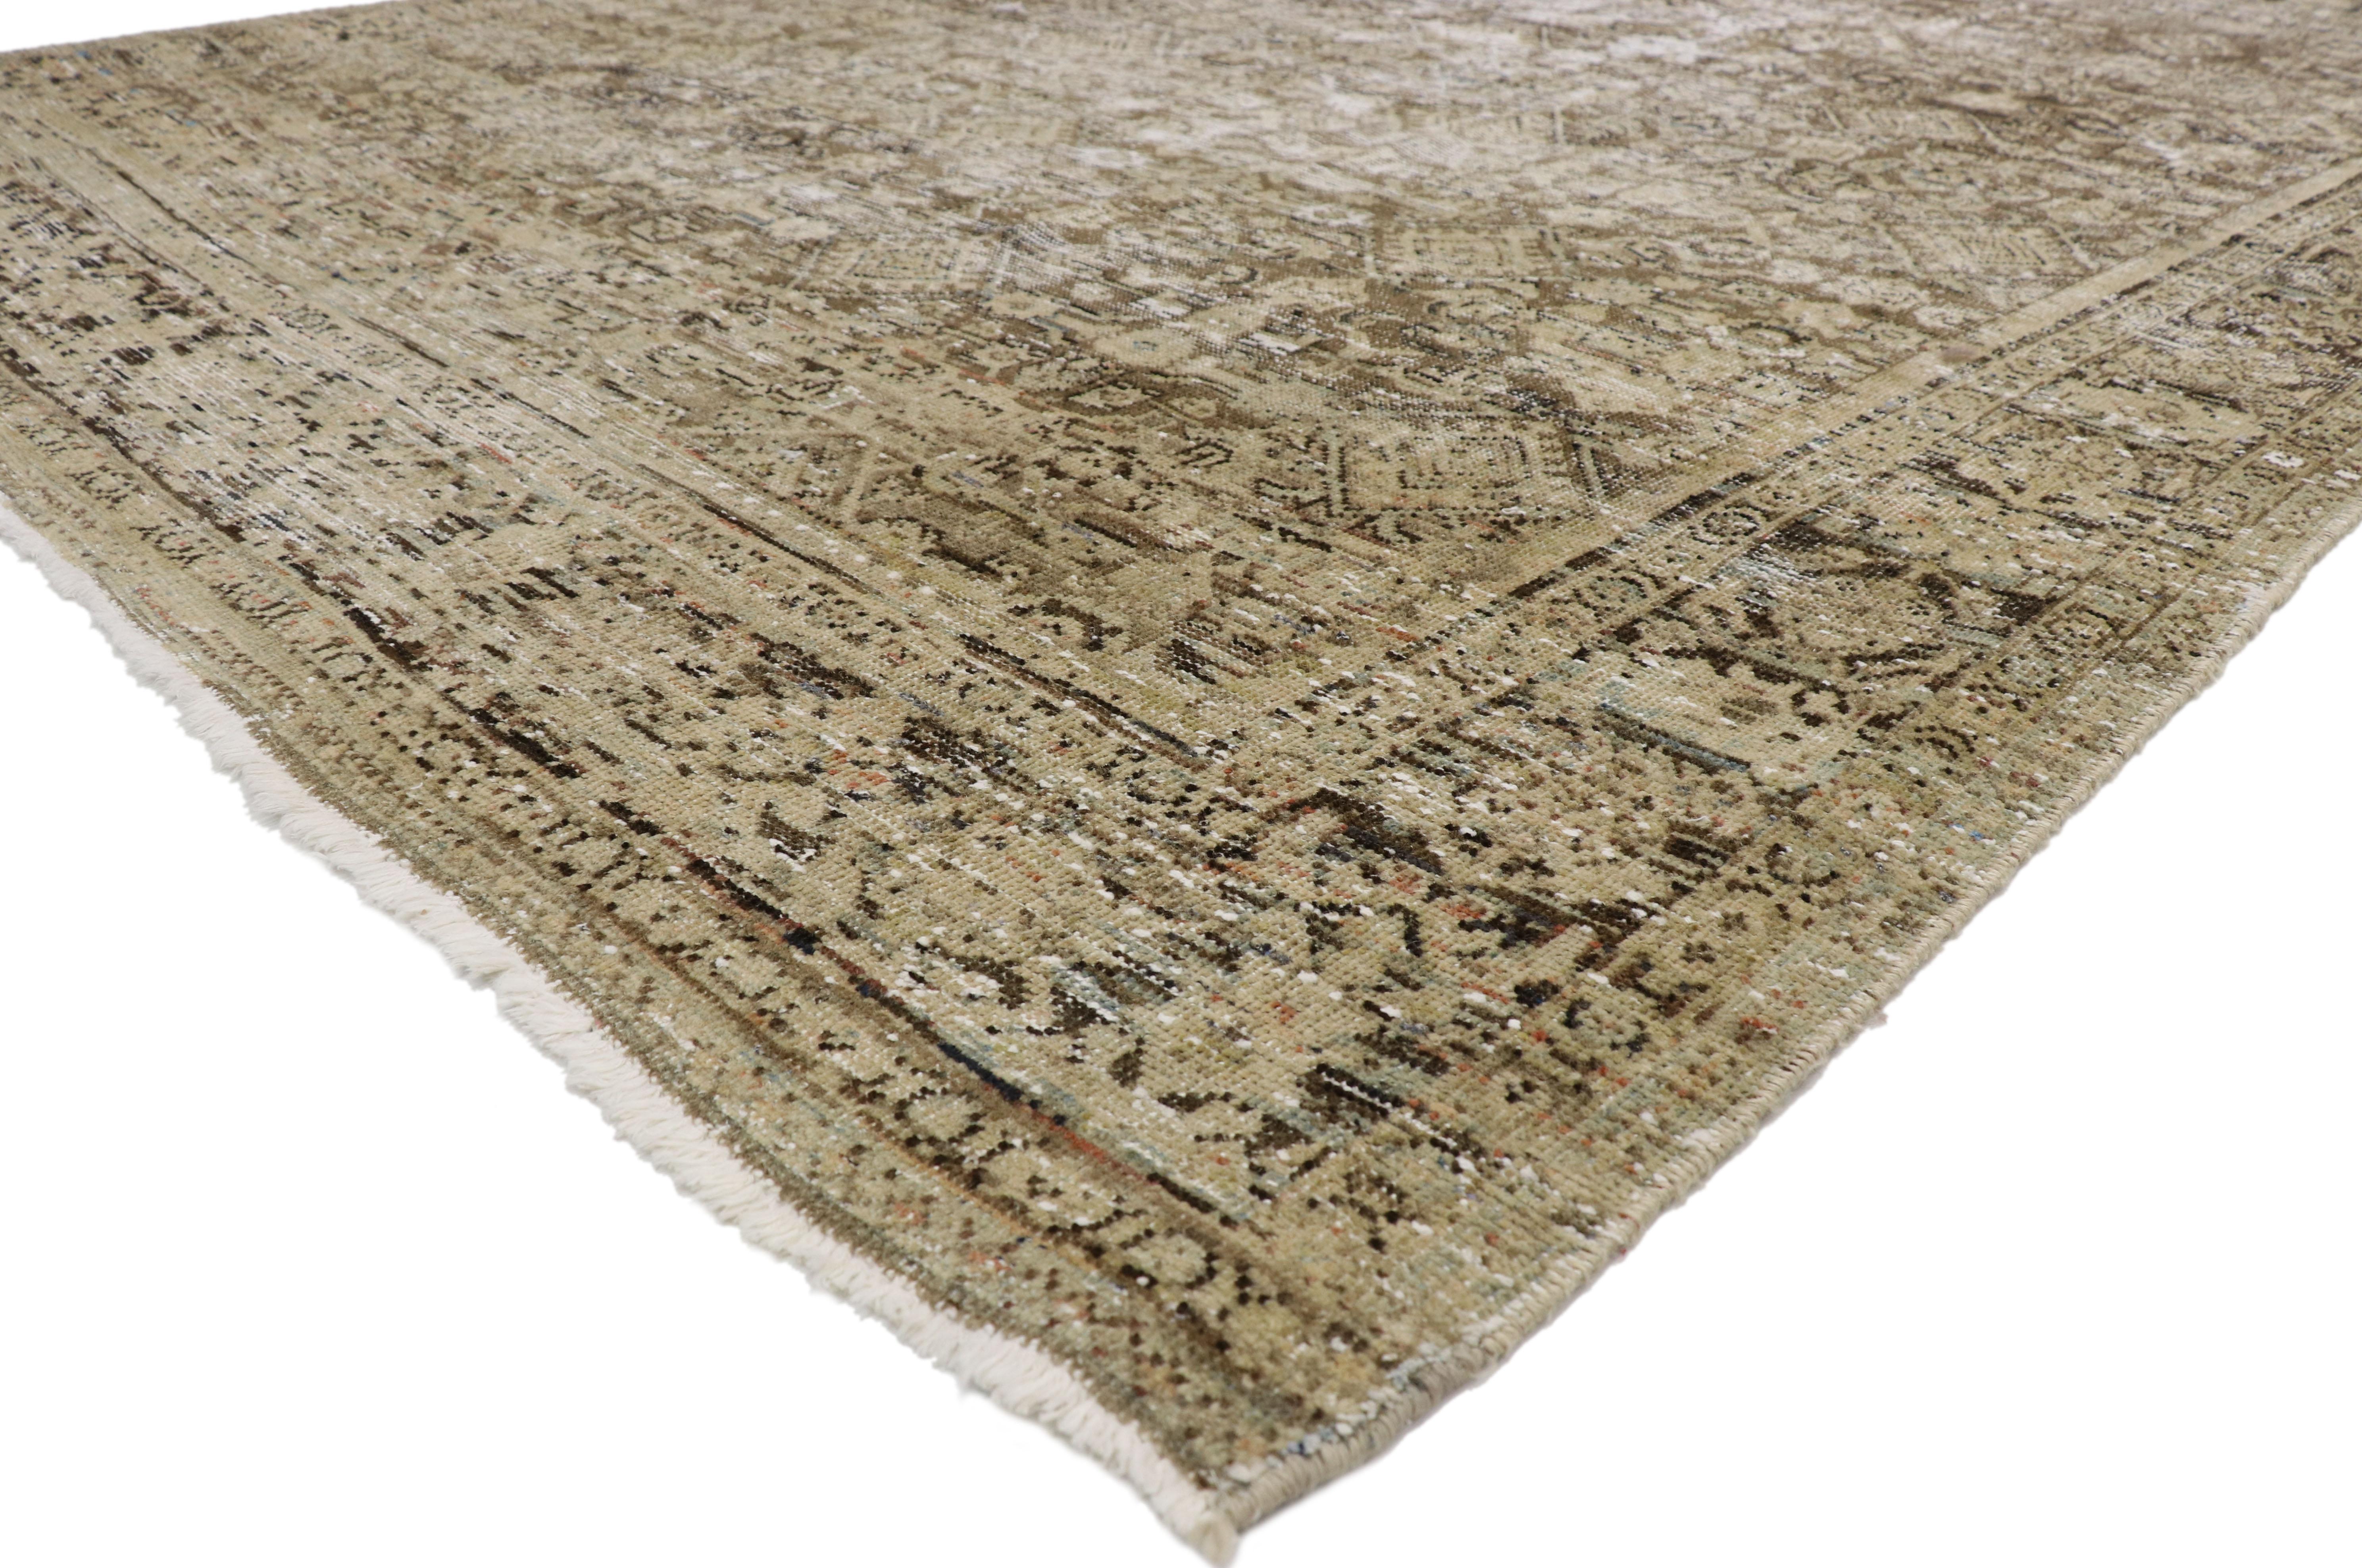 74910 distressed antique Persian Mahal rug with Modern Rustic English Manor style. With its warm earth-tone colors and cozy simplicity, this hand knotted wool distressed antique Persian Mahal rug embraces rustic English Manor style. The weathered